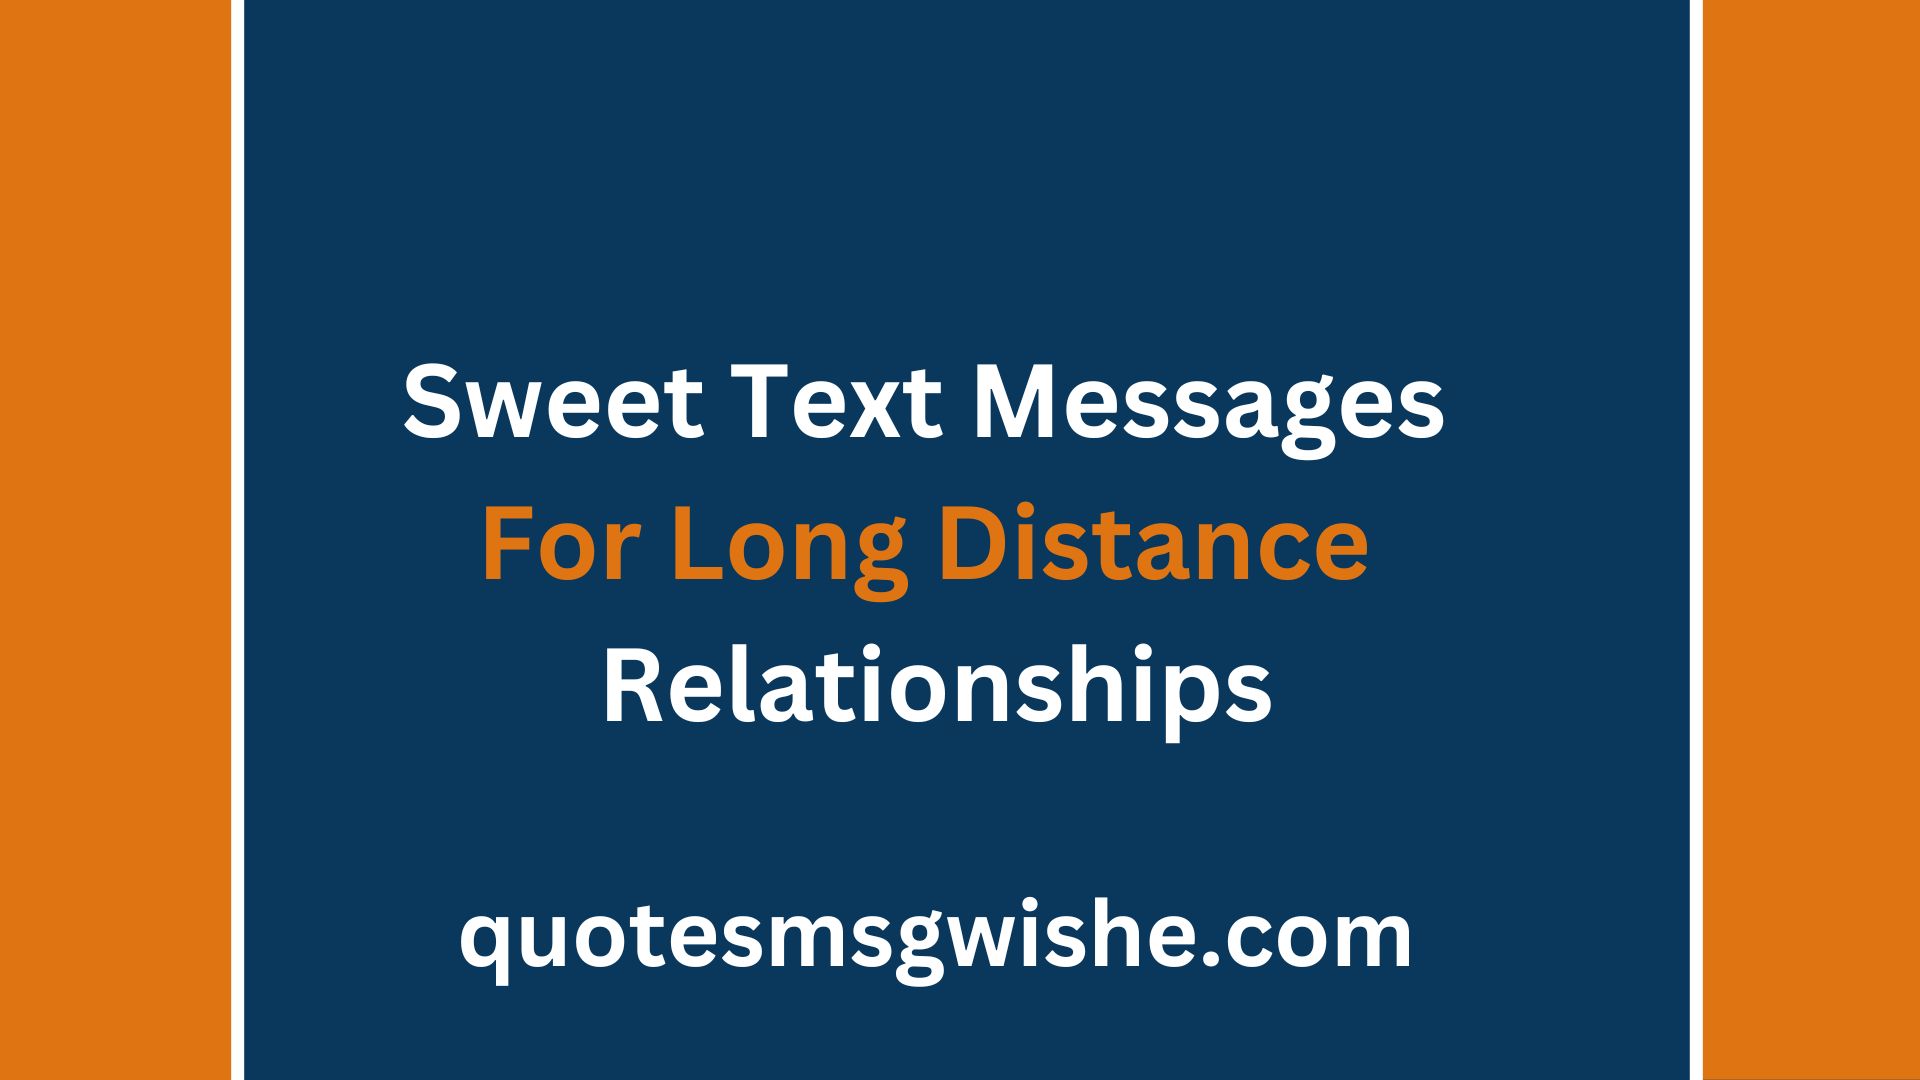 80 Romantic And Sweet Text Messages For Long Distance Relationships For Him Her